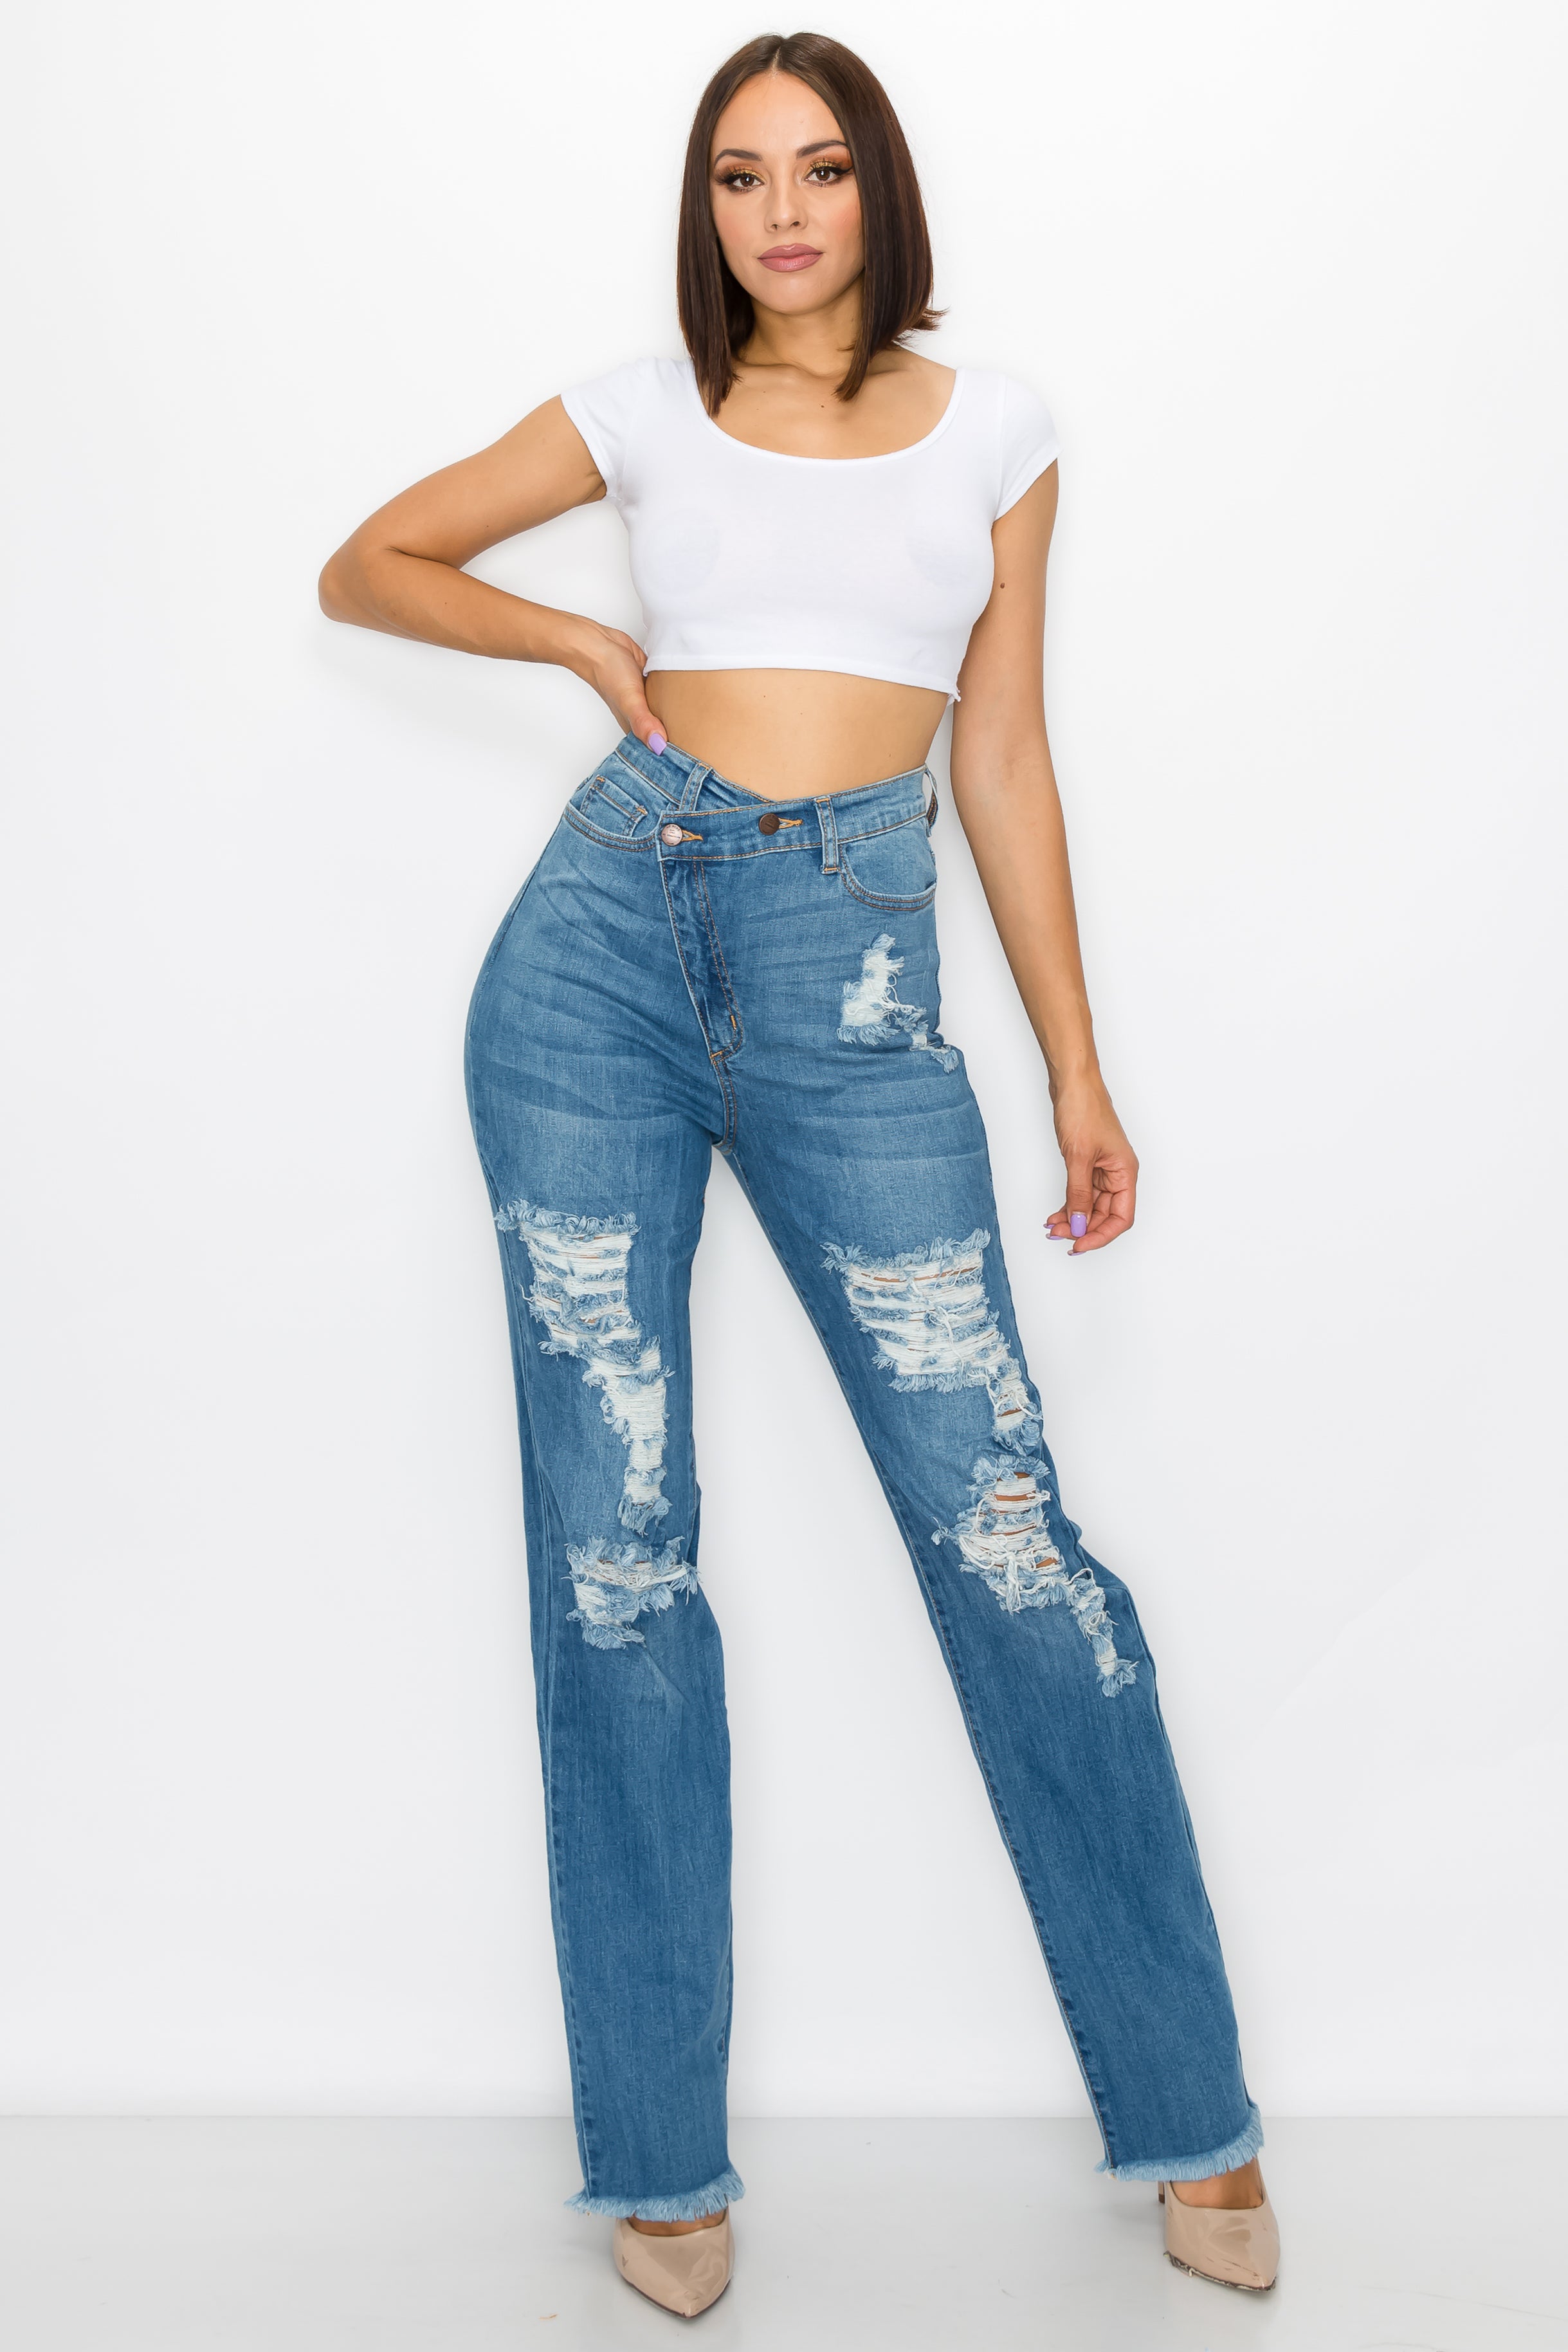 women full length wide super high rise high waisted distressed jeans pants